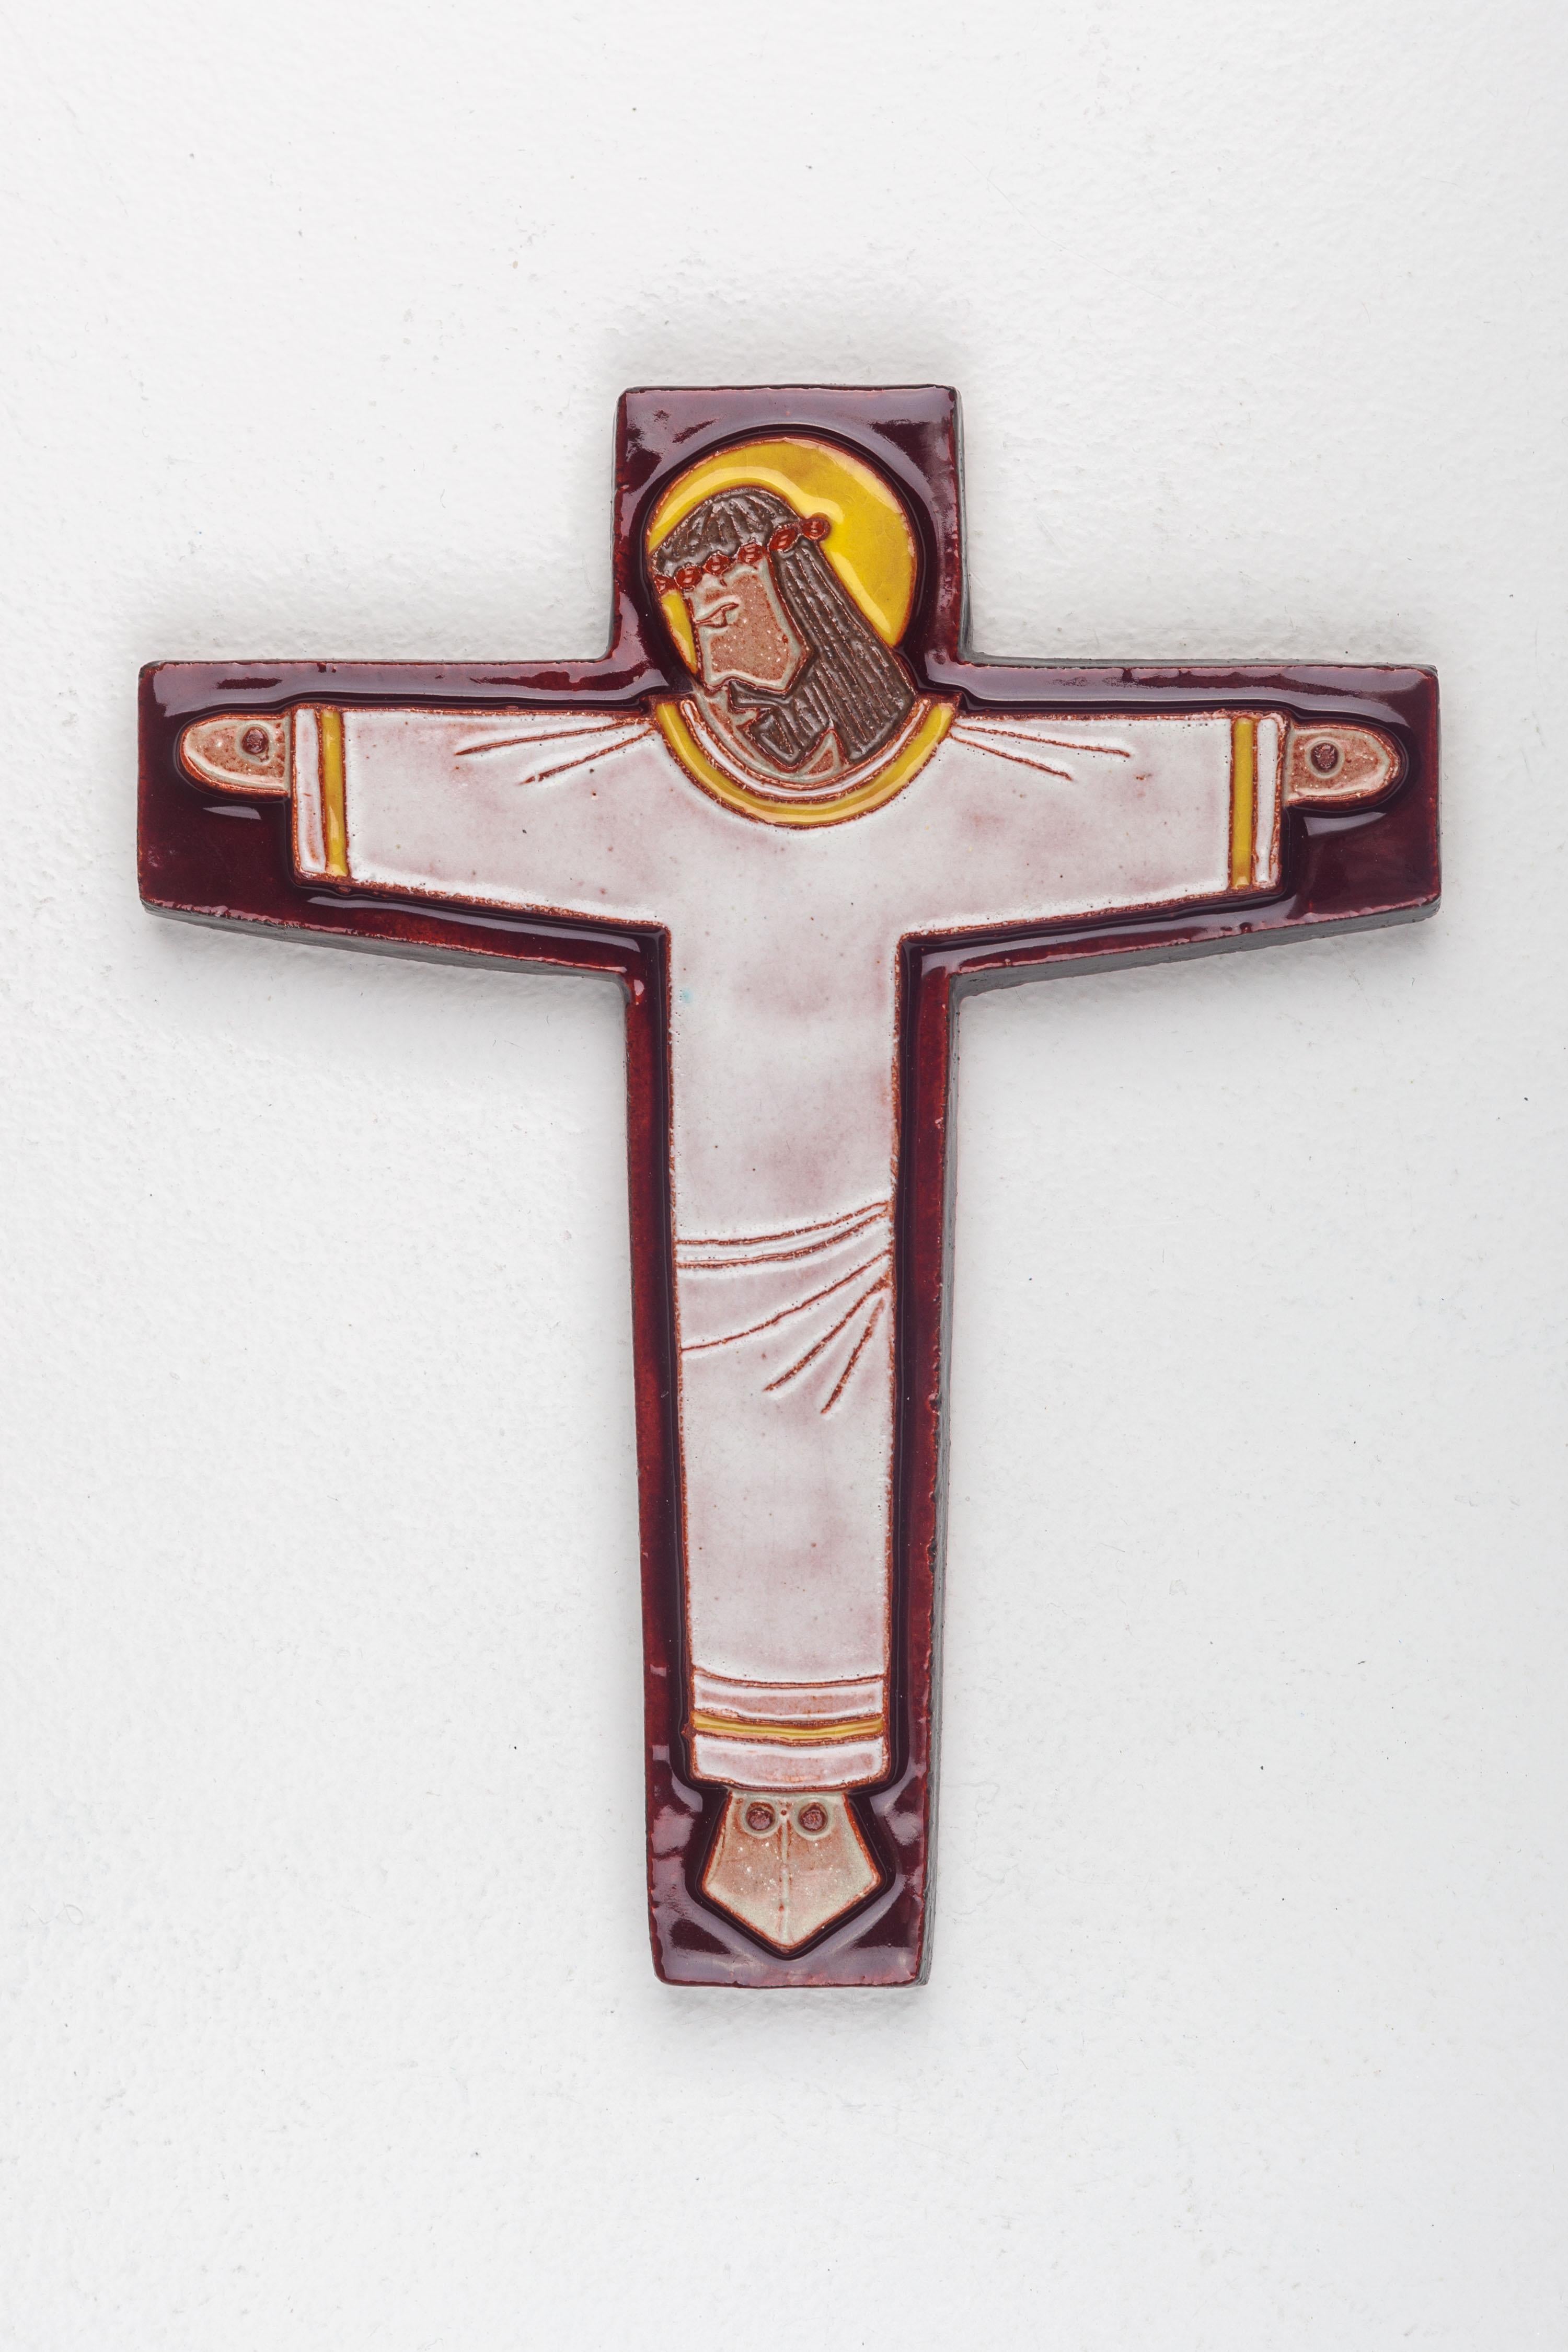 A midcentury European ceramic cross with an archetypal Christ figure adorned by a yellow halo. An interesting combo of color and texture with a variety of earth tones and a high gloss glaze. 

This cross mirrors the architectural landscapes of the